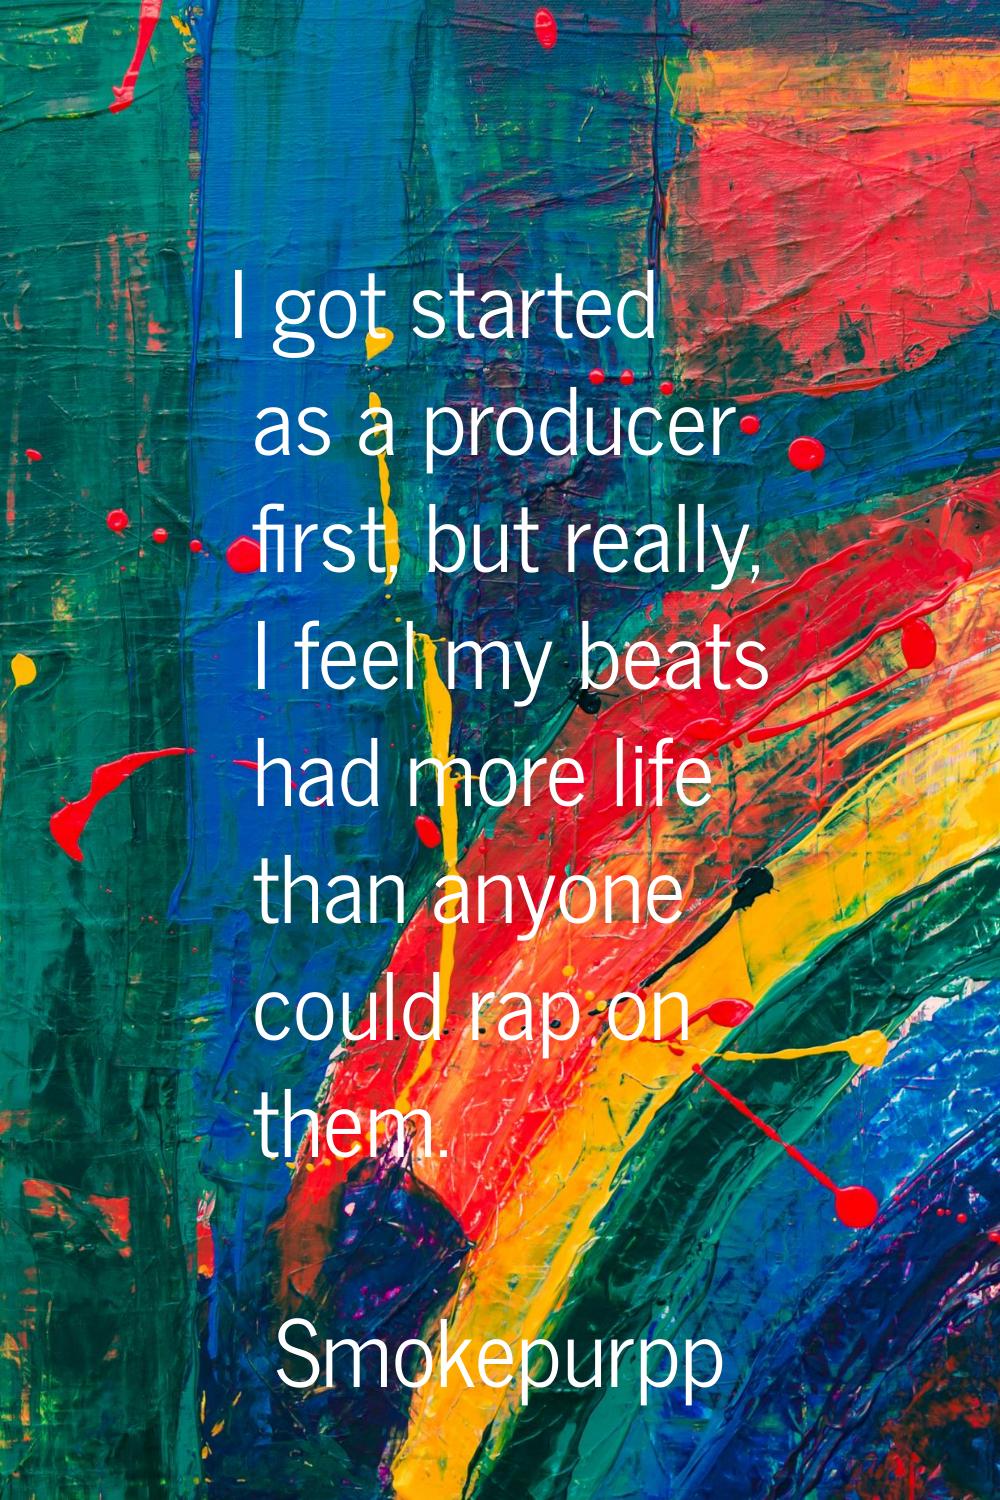 I got started as a producer first, but really, I feel my beats had more life than anyone could rap 